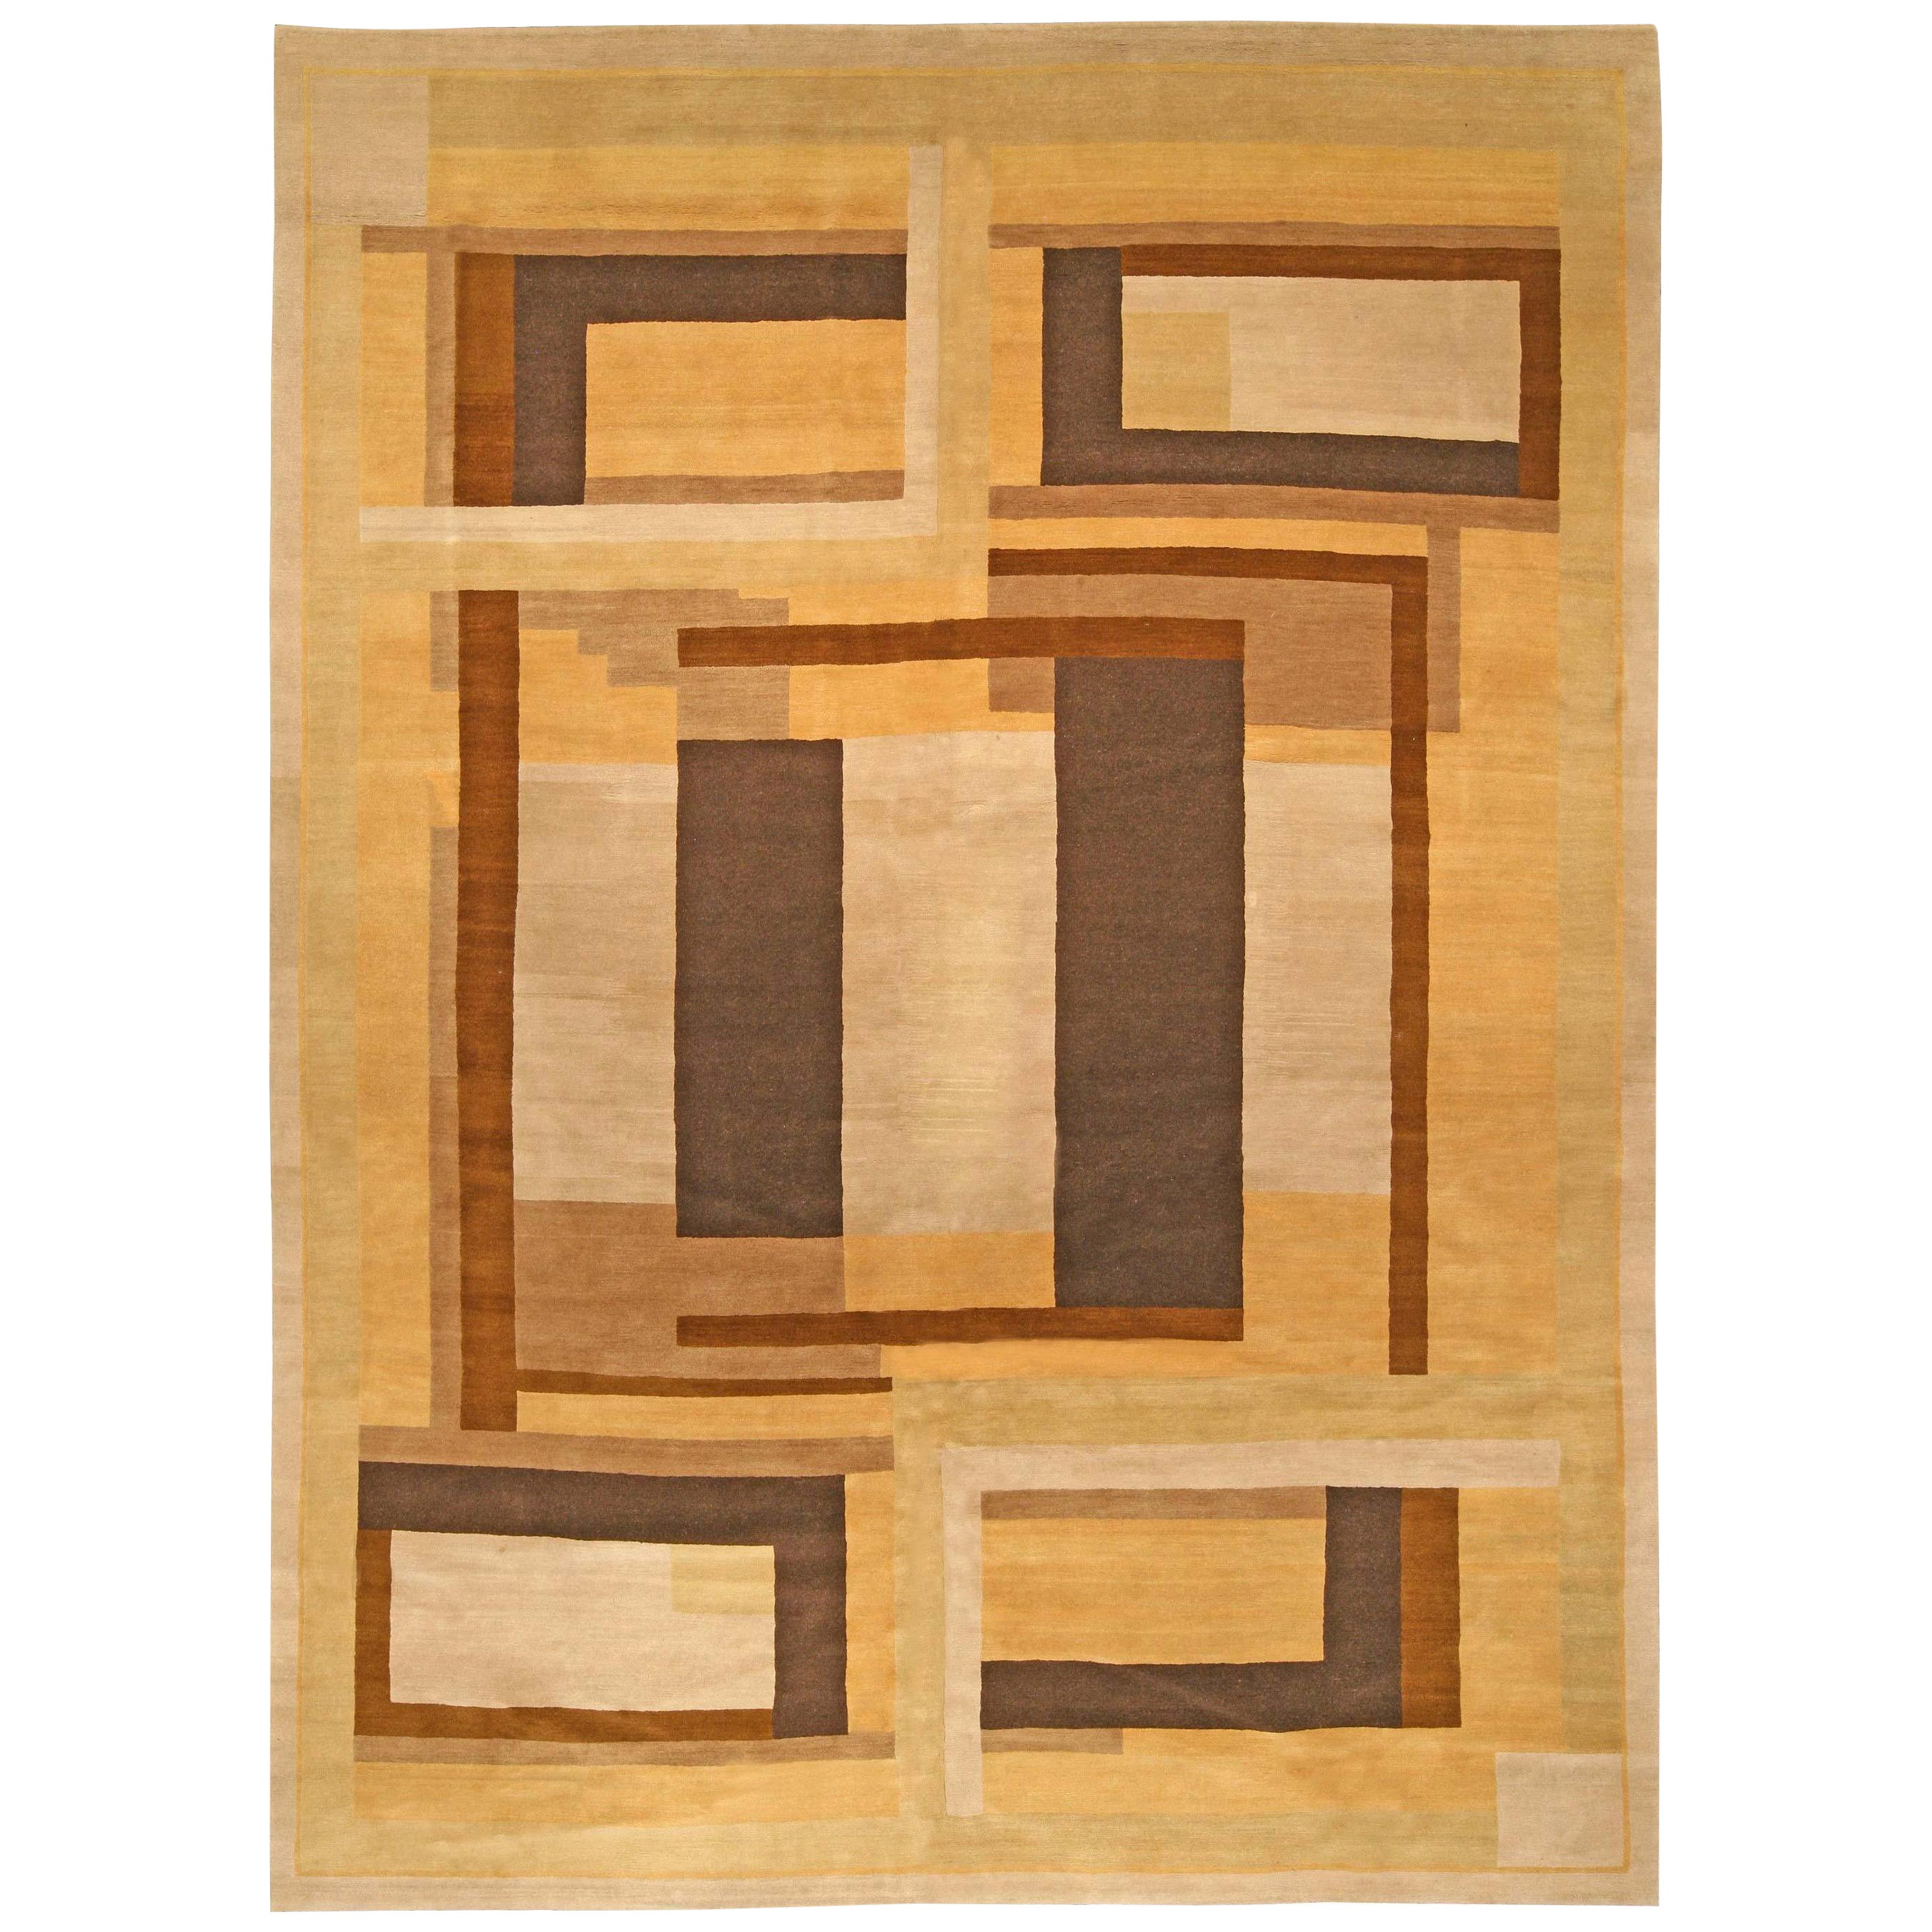 Contemporary Art Deco Inspired Brown, Beige and Yellow Rug by Doris Leslie Blau